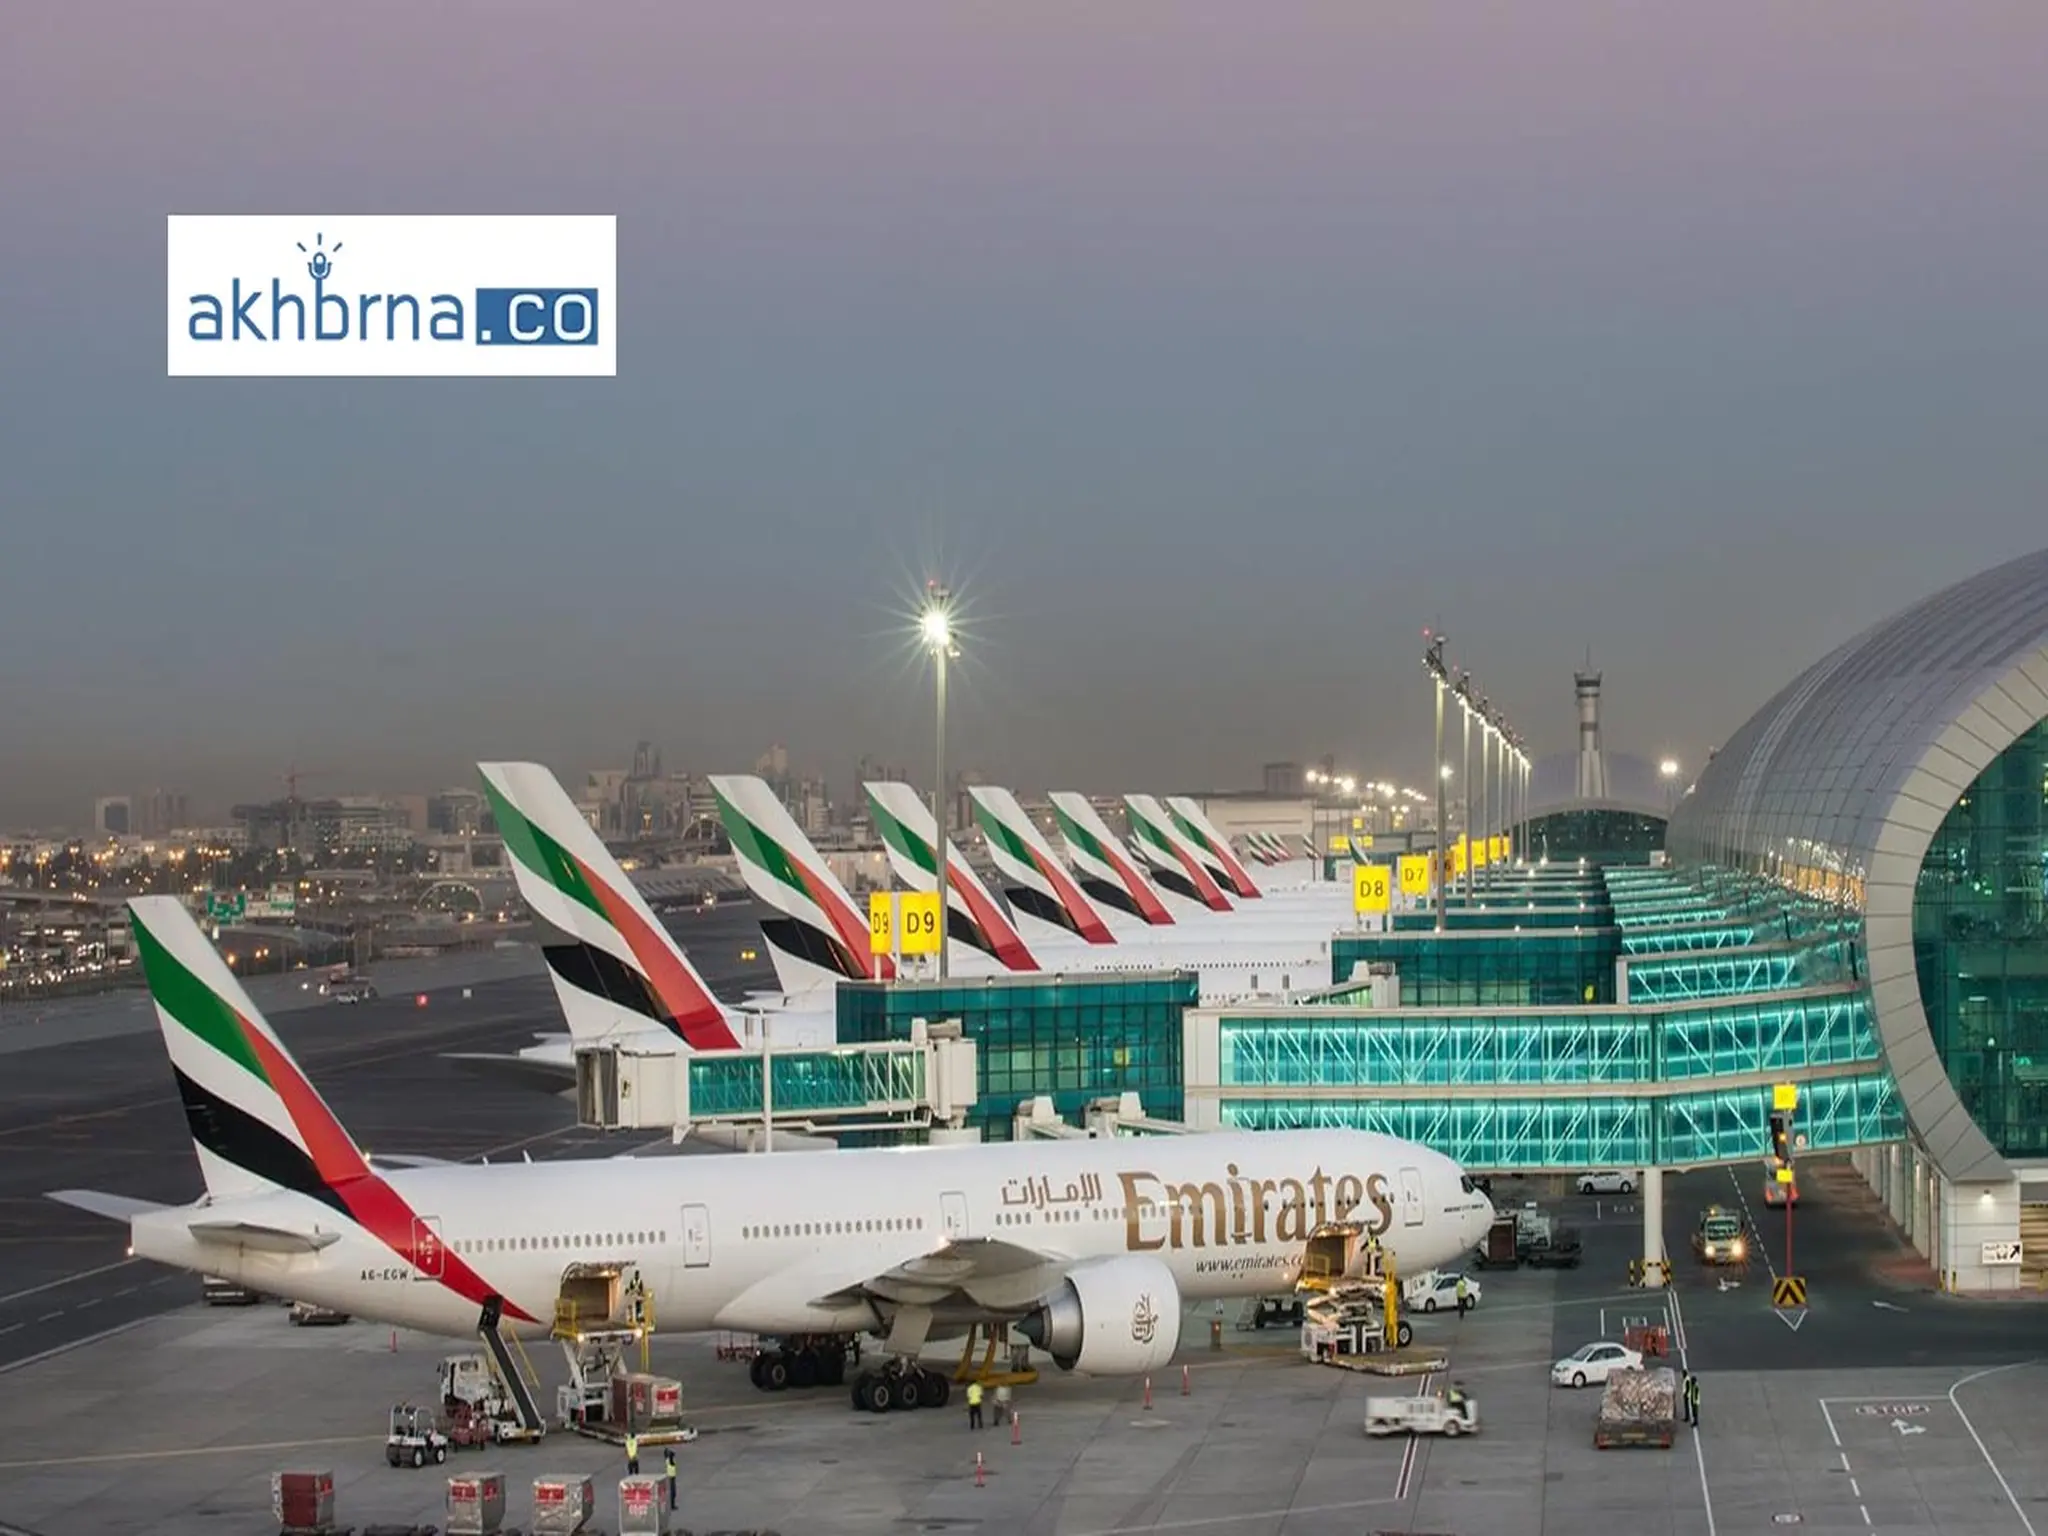 The Emirates has started employing AI to manage flights out of Dubai airports